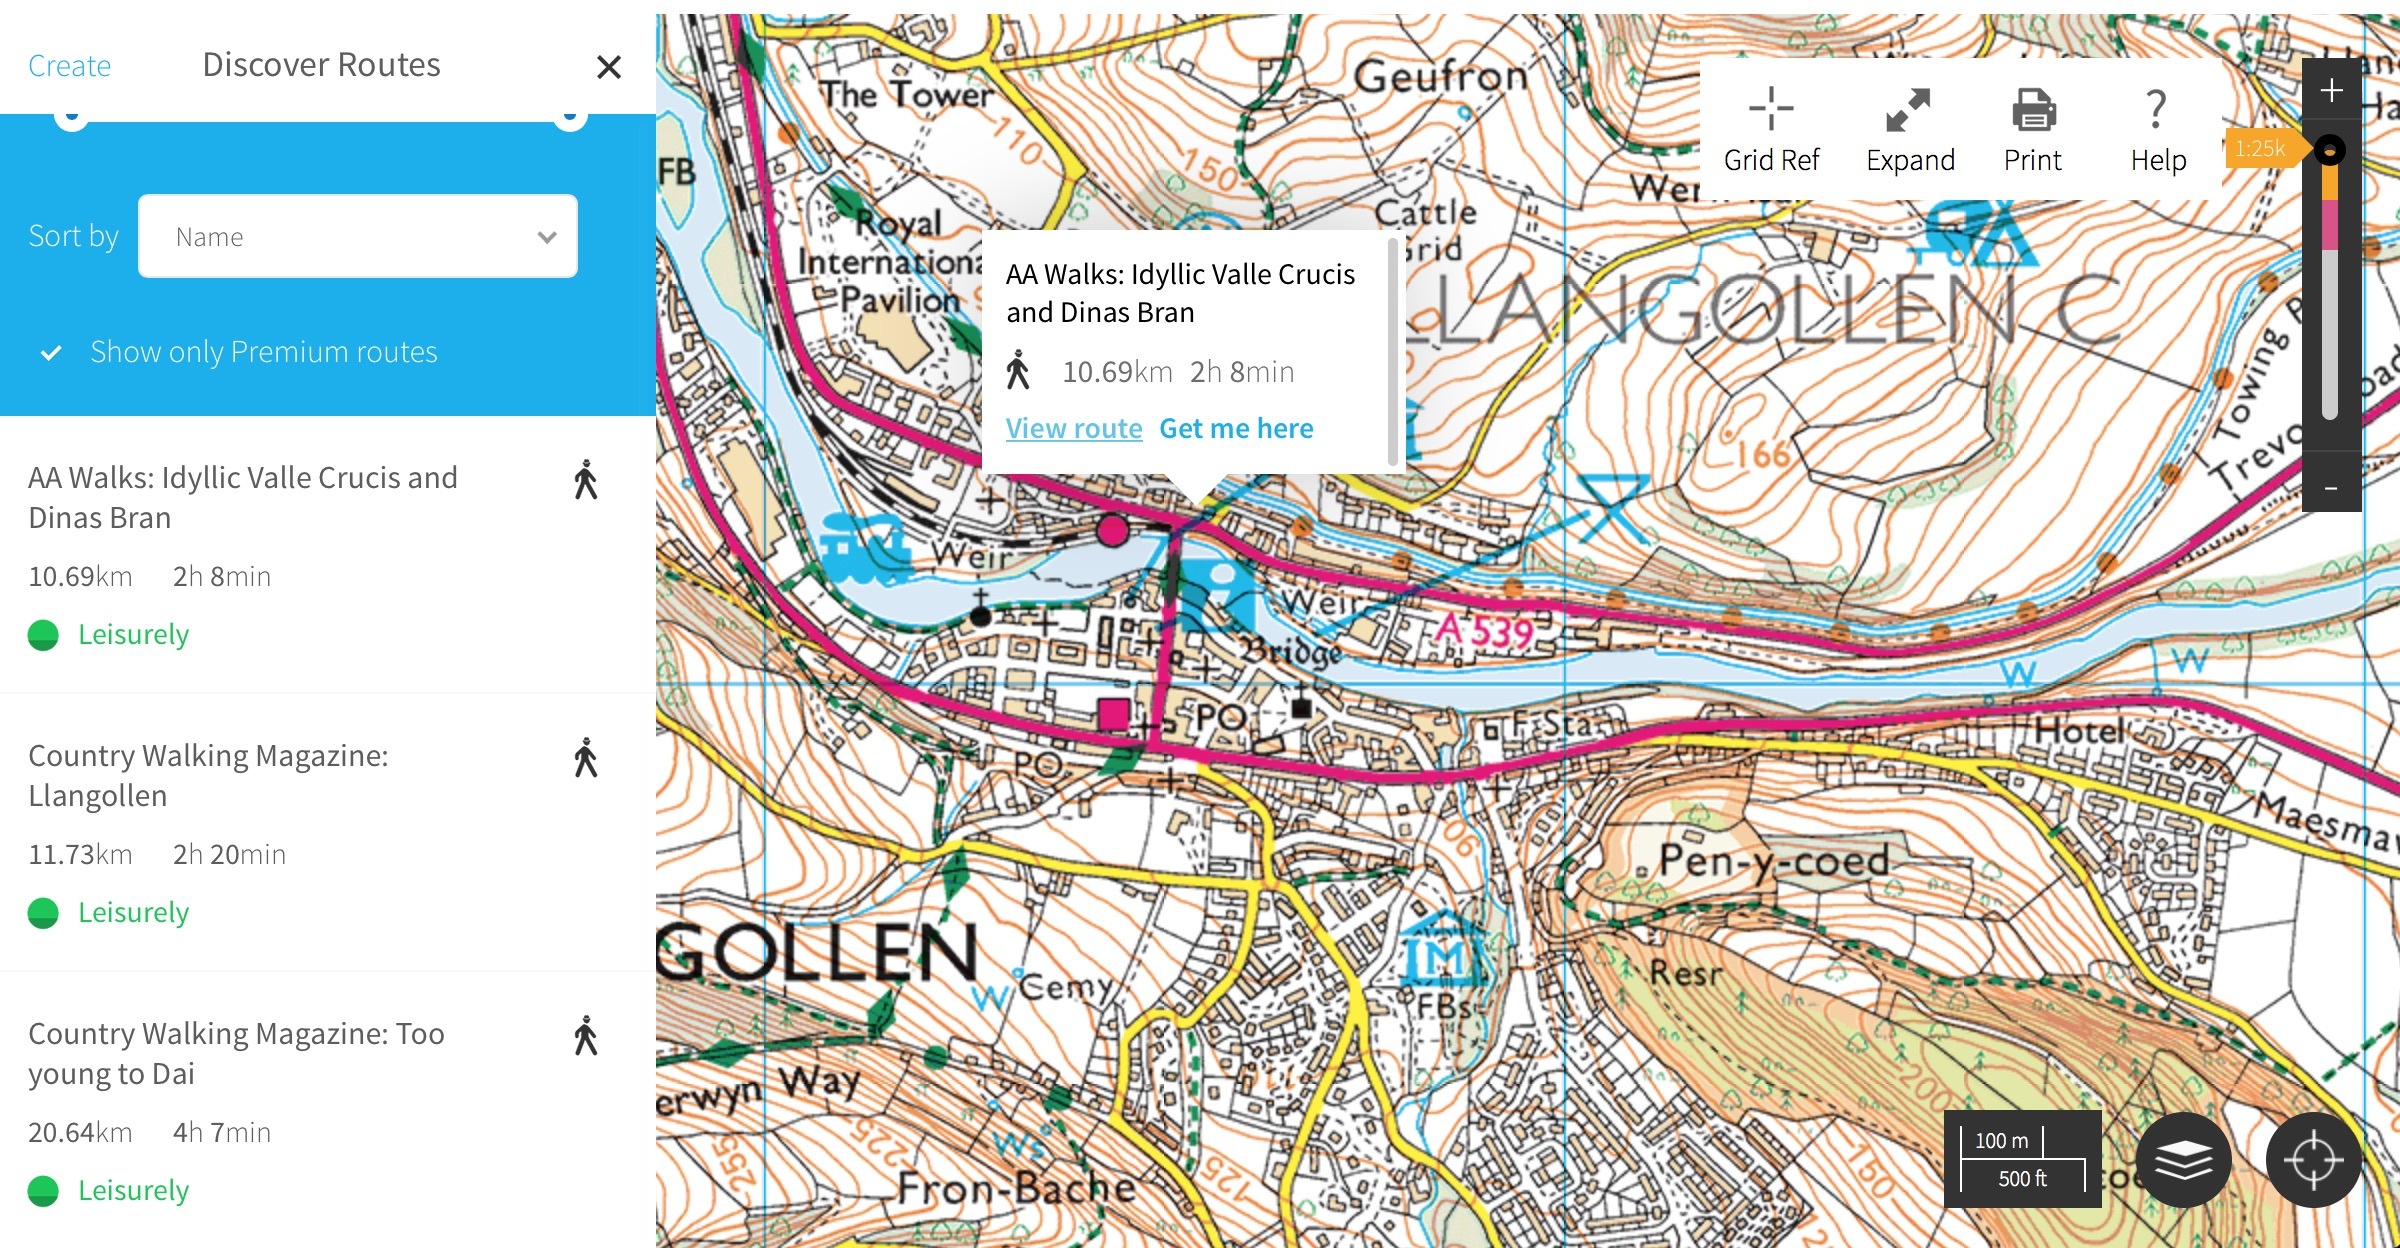 Searching for routes on OS Maps